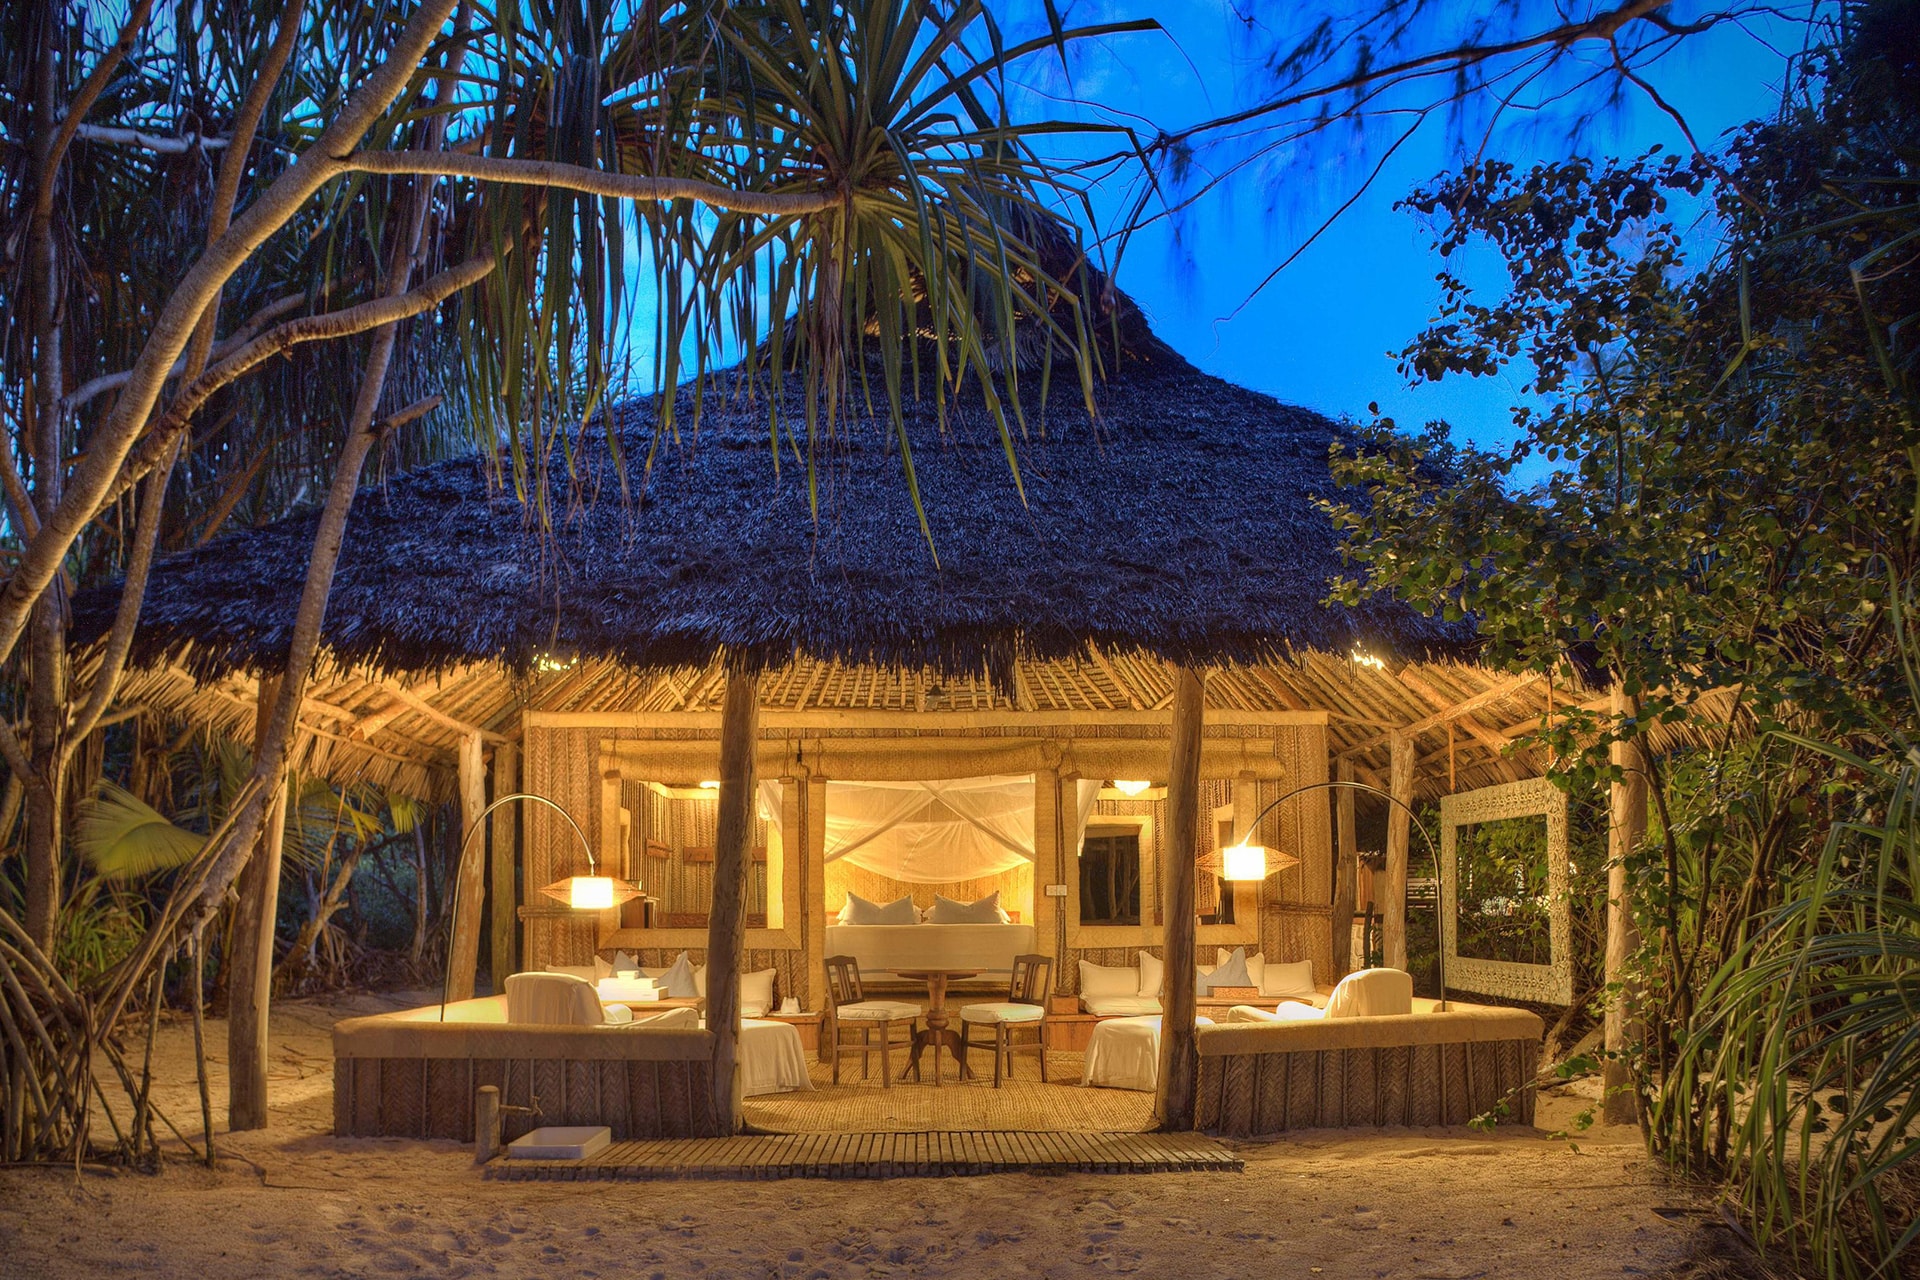 Your accommodation at andBeyond Mnemba Island, one of the private islands in Africa